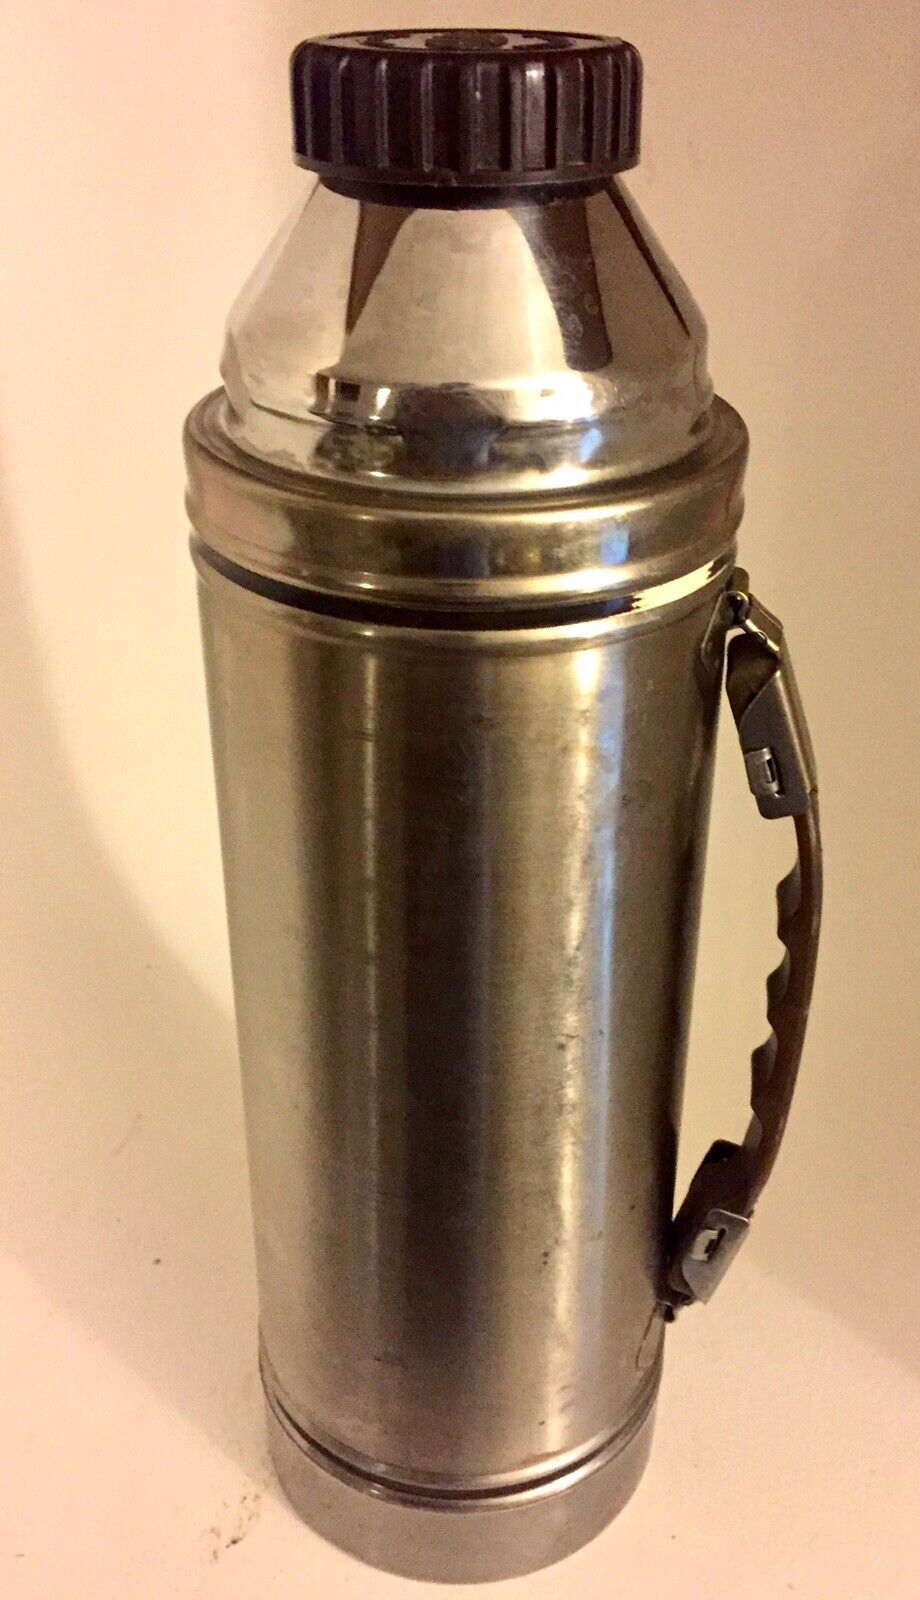 http://www.celebritycarsblog.com/store/img-large/g/o7sAAOSwBSlhG0CD/s-l1600/Vintage-Hot-Cold-Champ-Stainless-Steel-Thermos-Unb.jpg